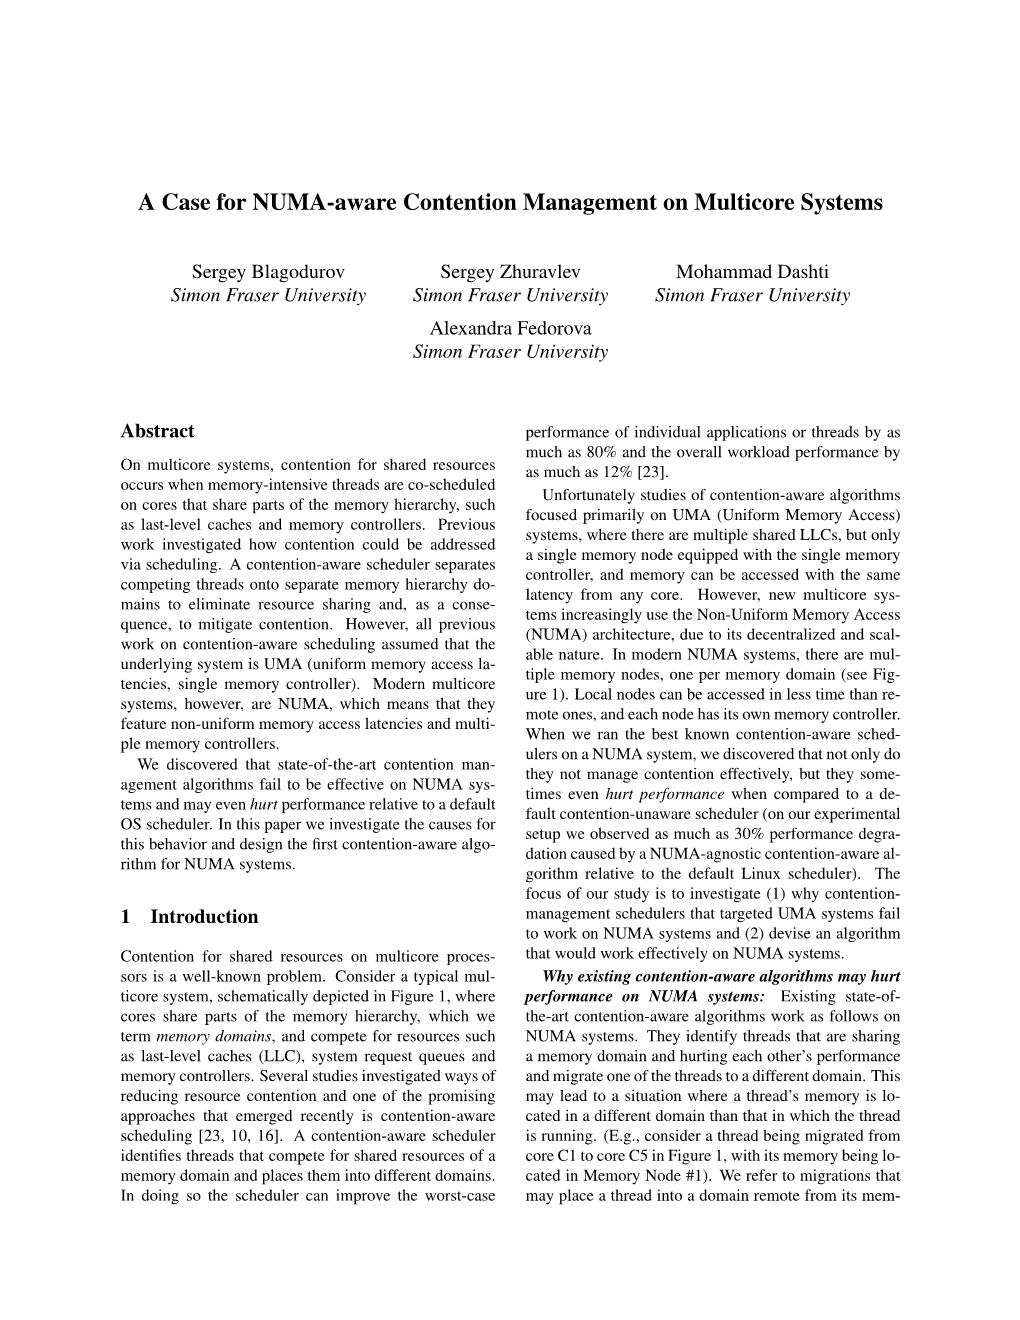 A Case for NUMA-Aware Contention Management on Multicore Systems